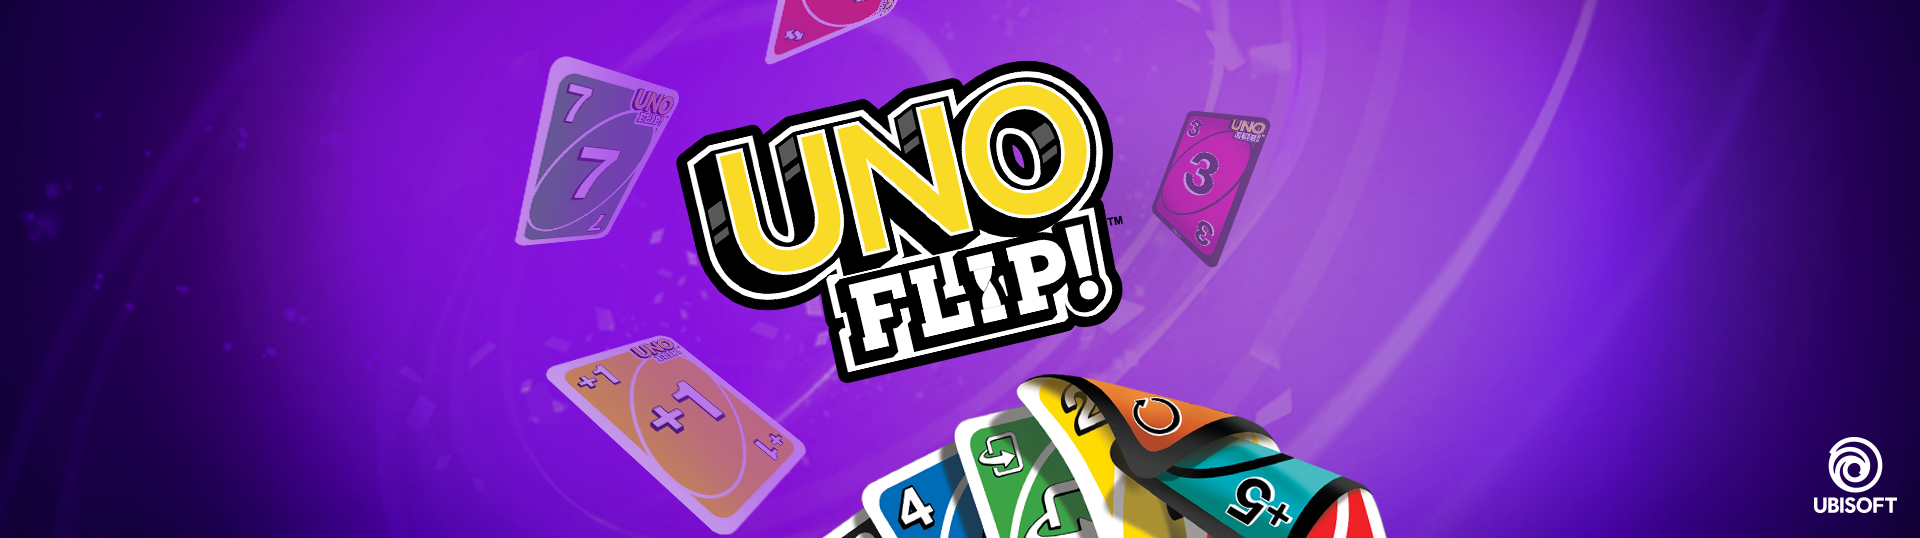 Uno Online Card Game - Best Android Card Game 2020 - Best